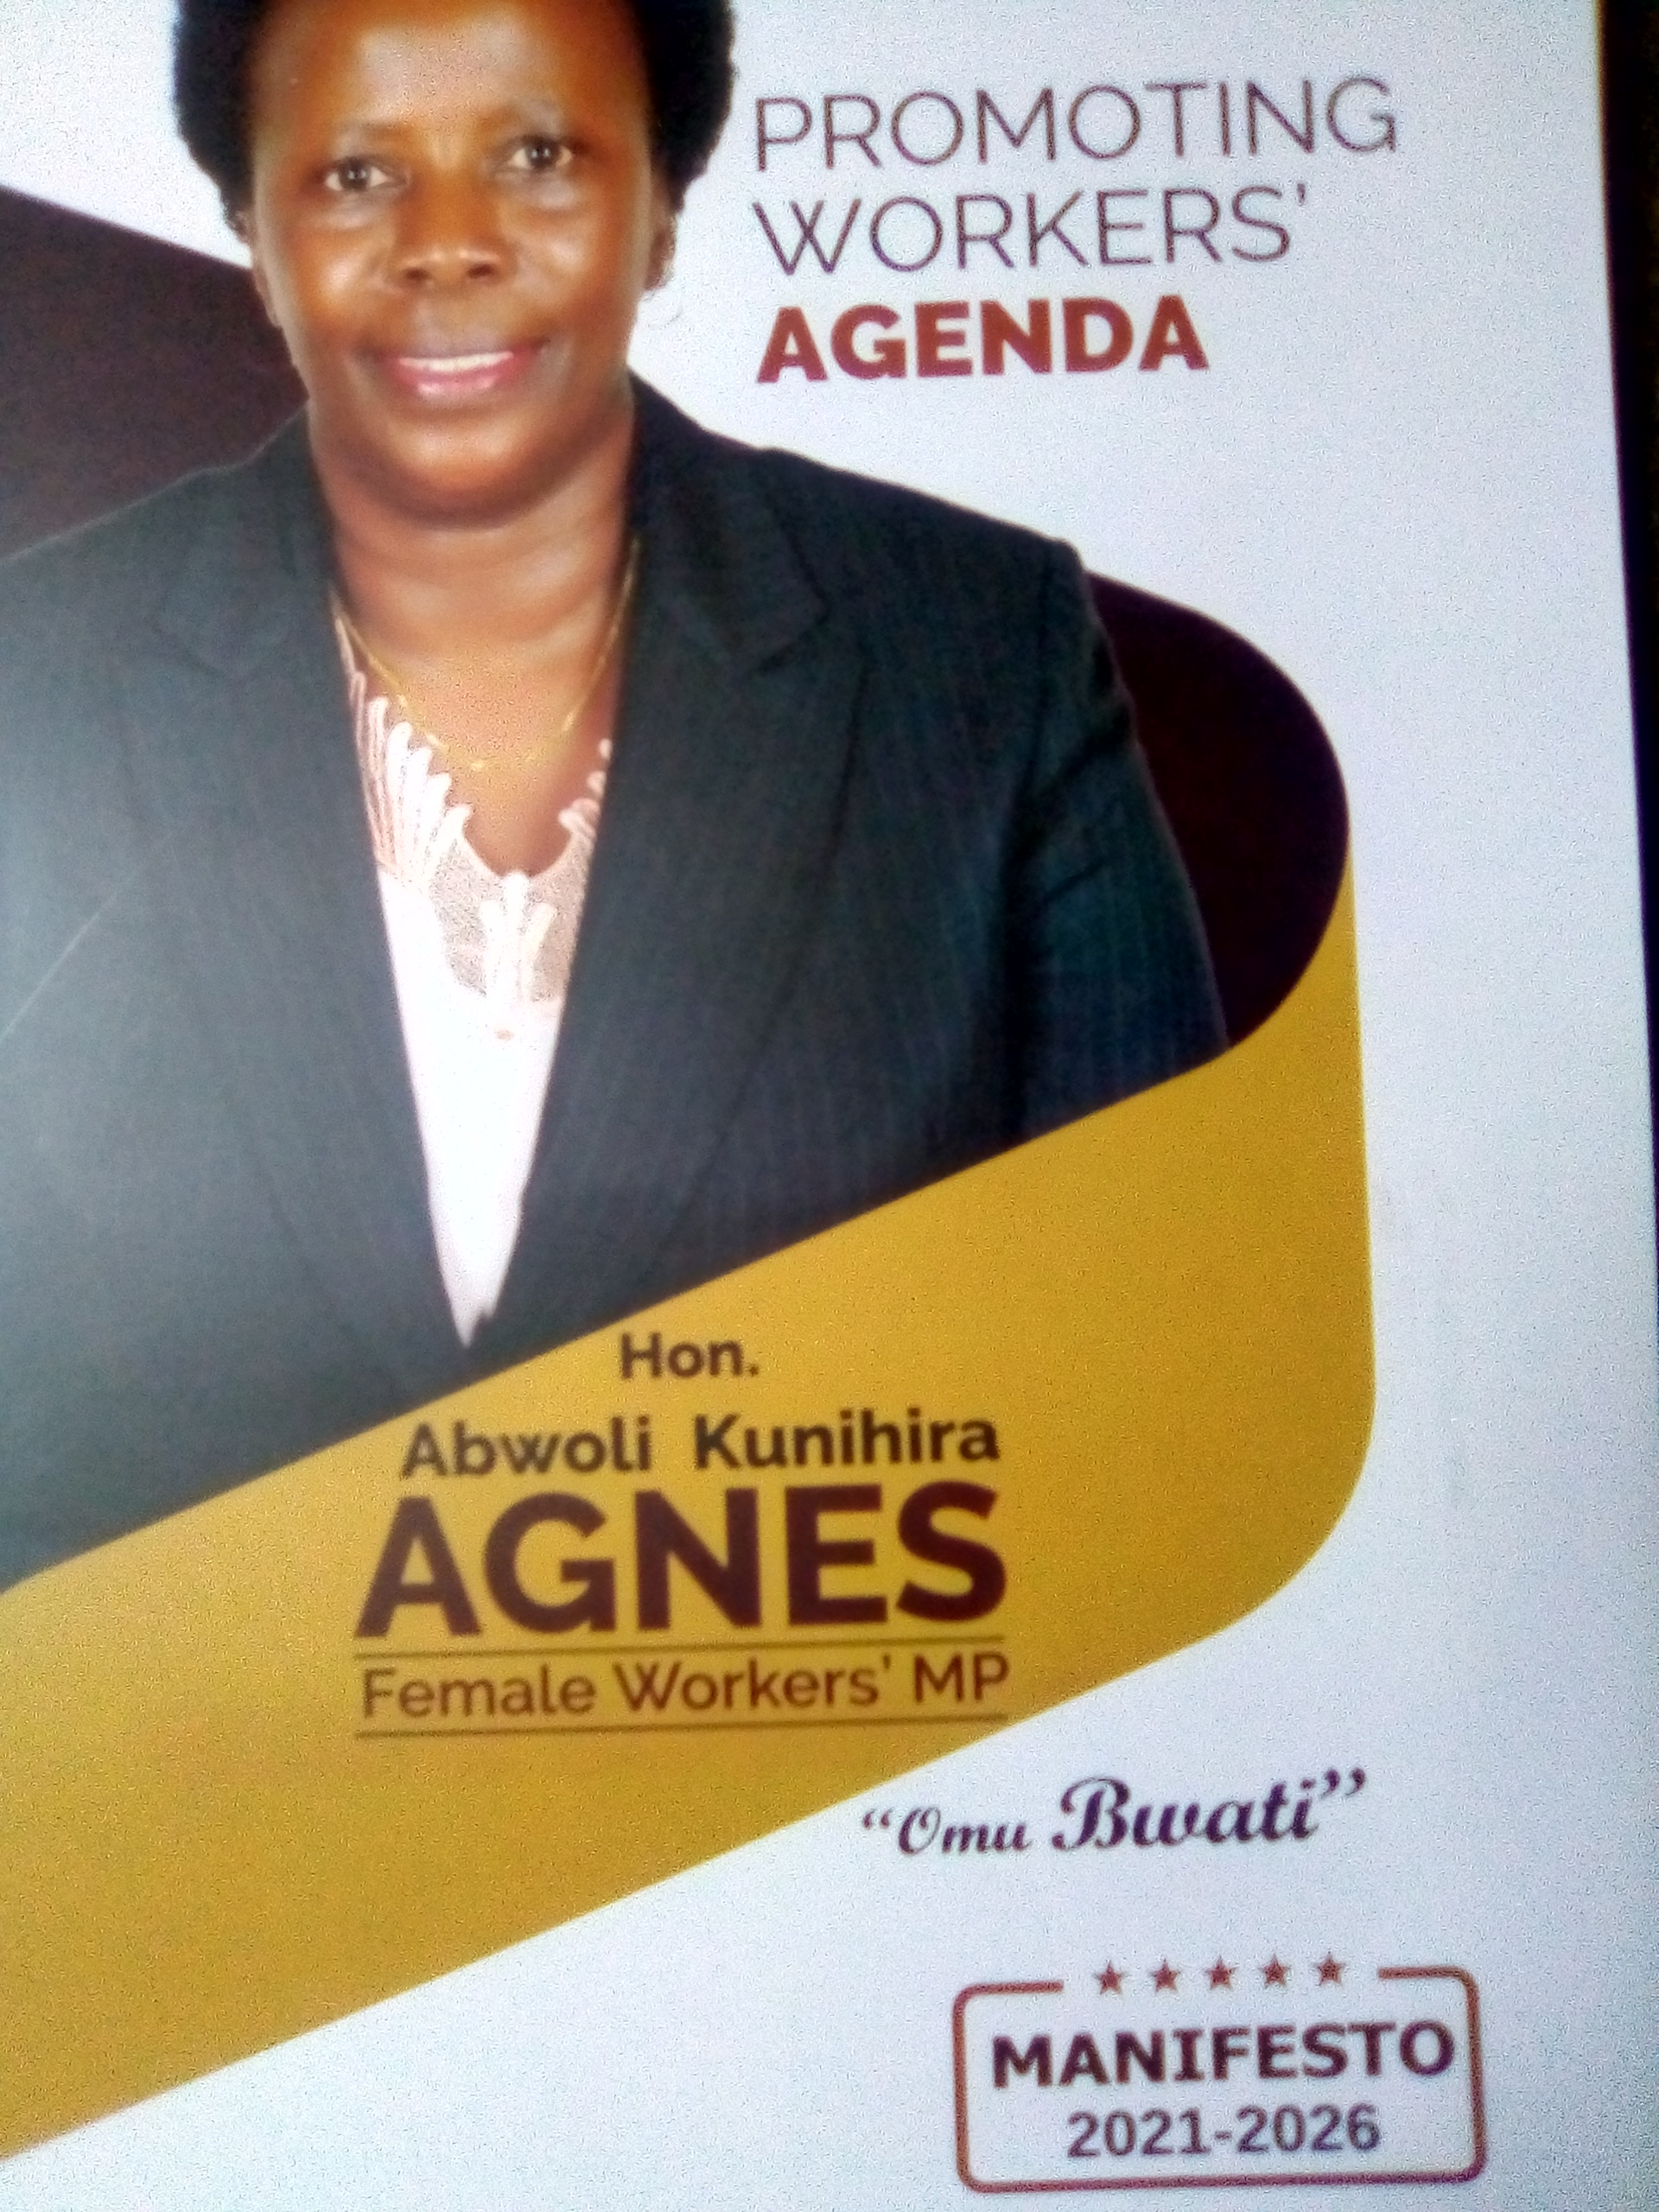 Hon Agnes Kunihira exhibits political maturity at the launch of her manifesto 2021-2026